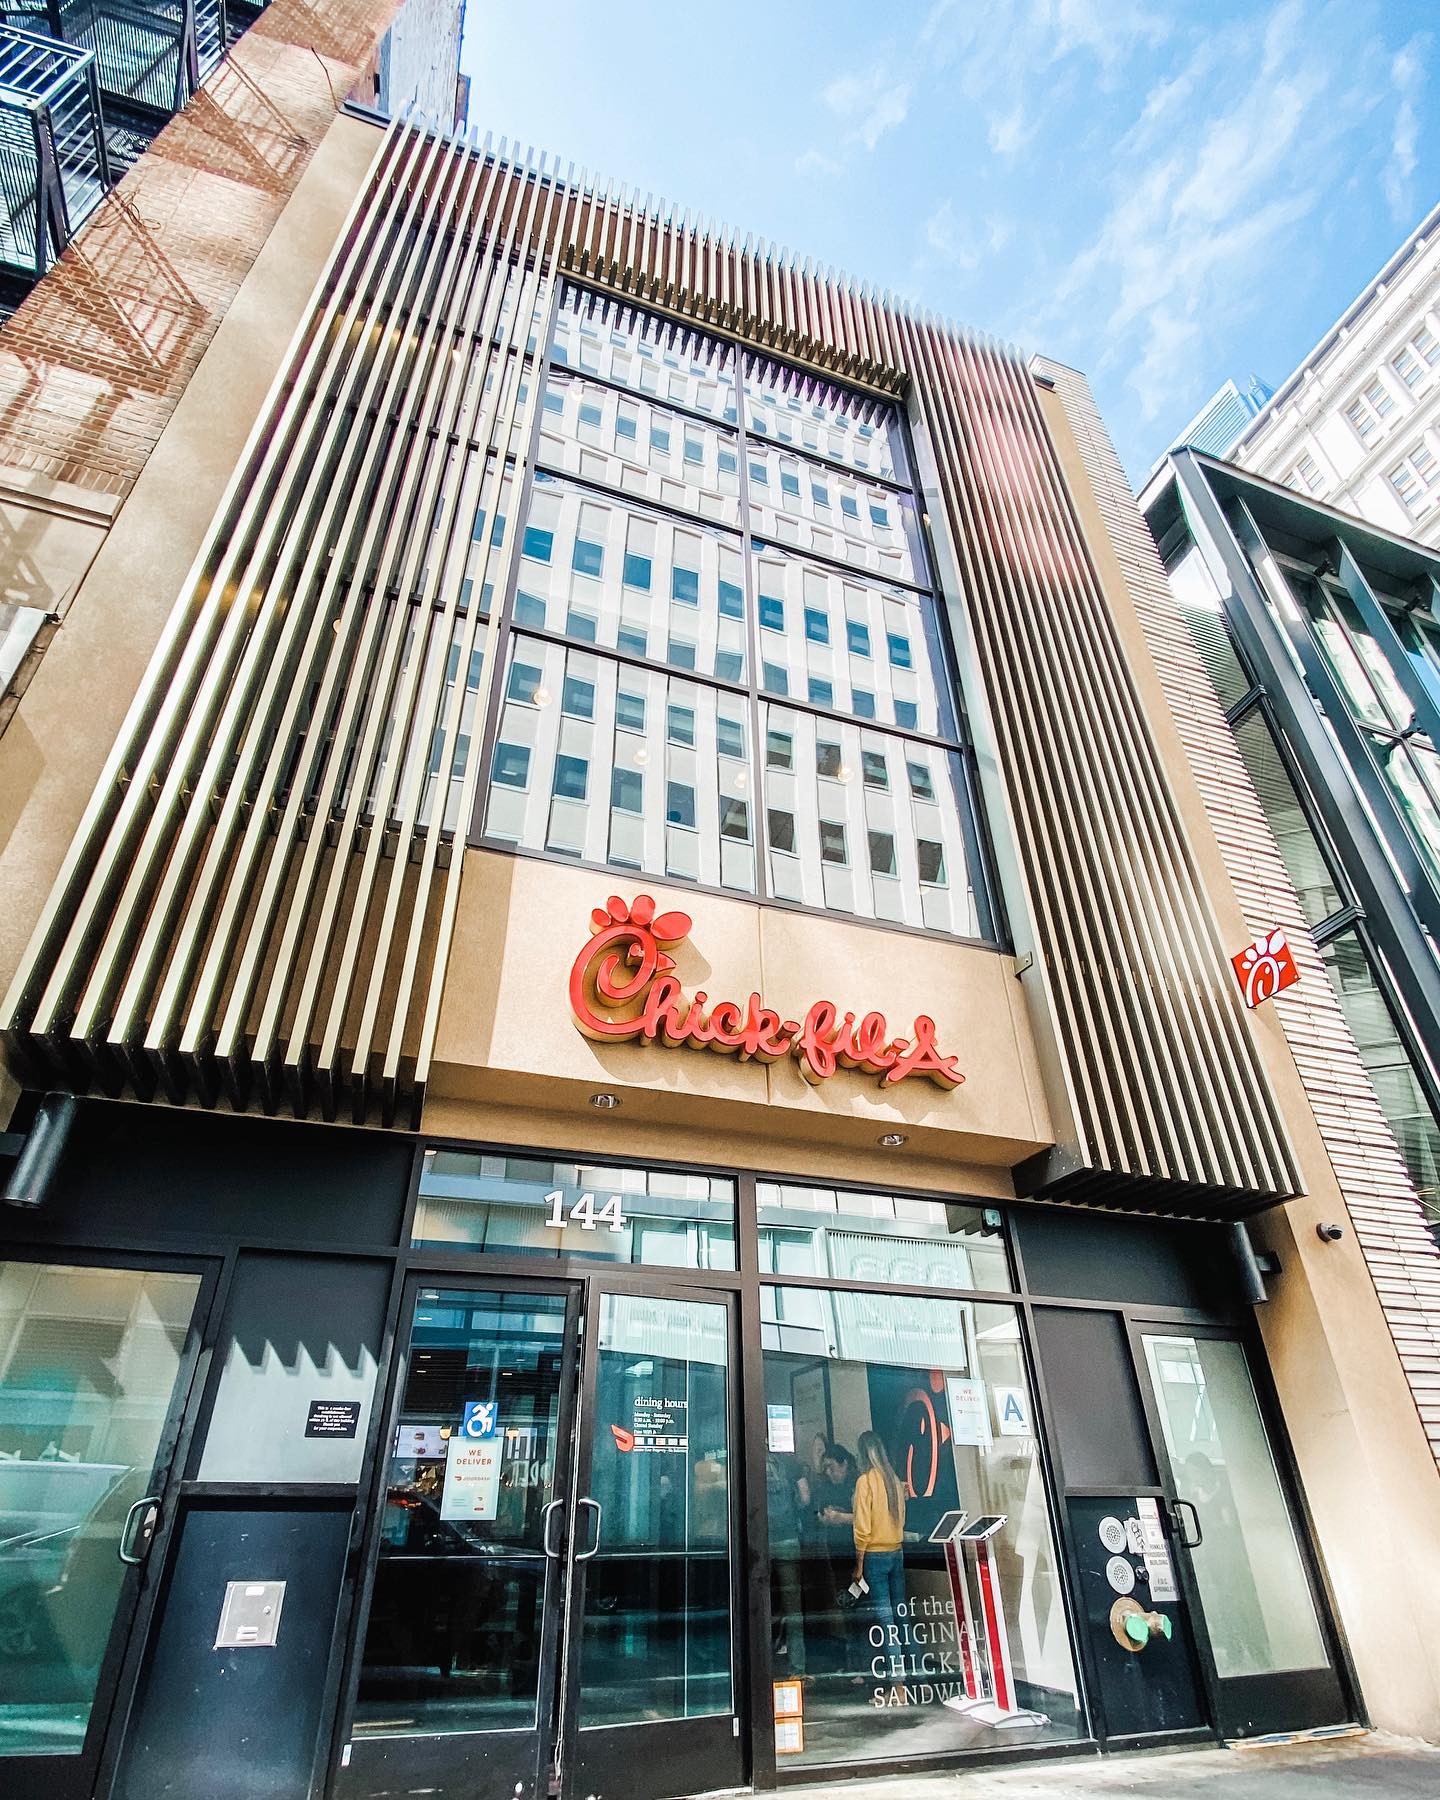 World’s Largest Chick-Fil-A: world record in New York City, New York